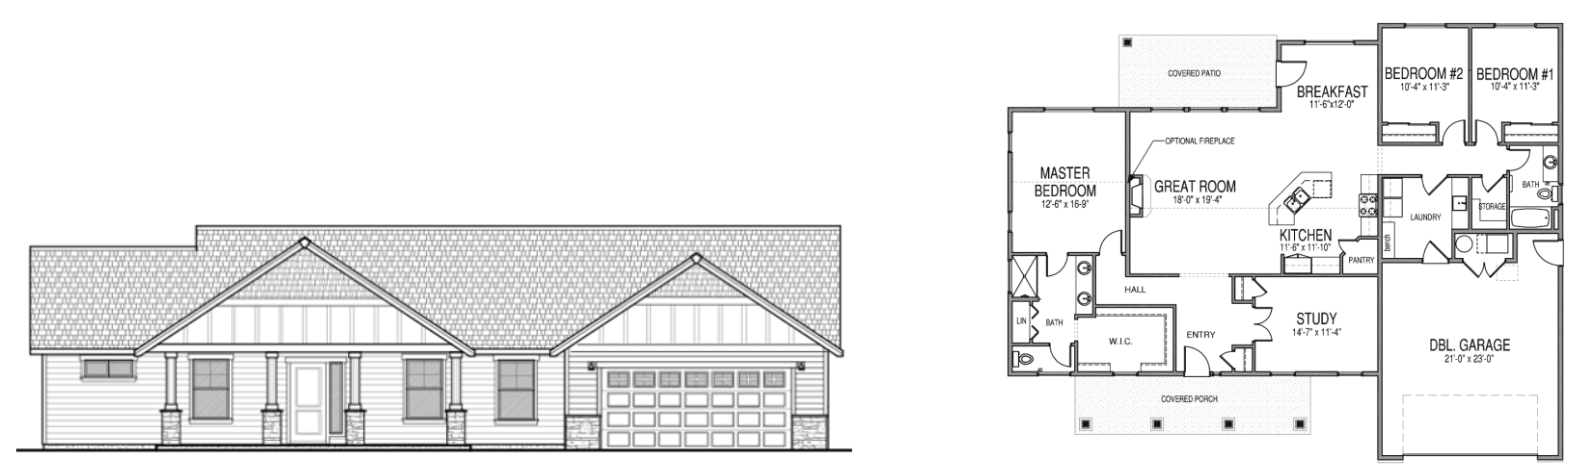 Taft 1 single story home floor plan with a master bedroom with a walk in closet and bathroom, 2 additional bedrooms, another bathroom, storage closet, a great room, dining space, kitchen, pantry, laundry room, study, double garage, and a covered porch and patio